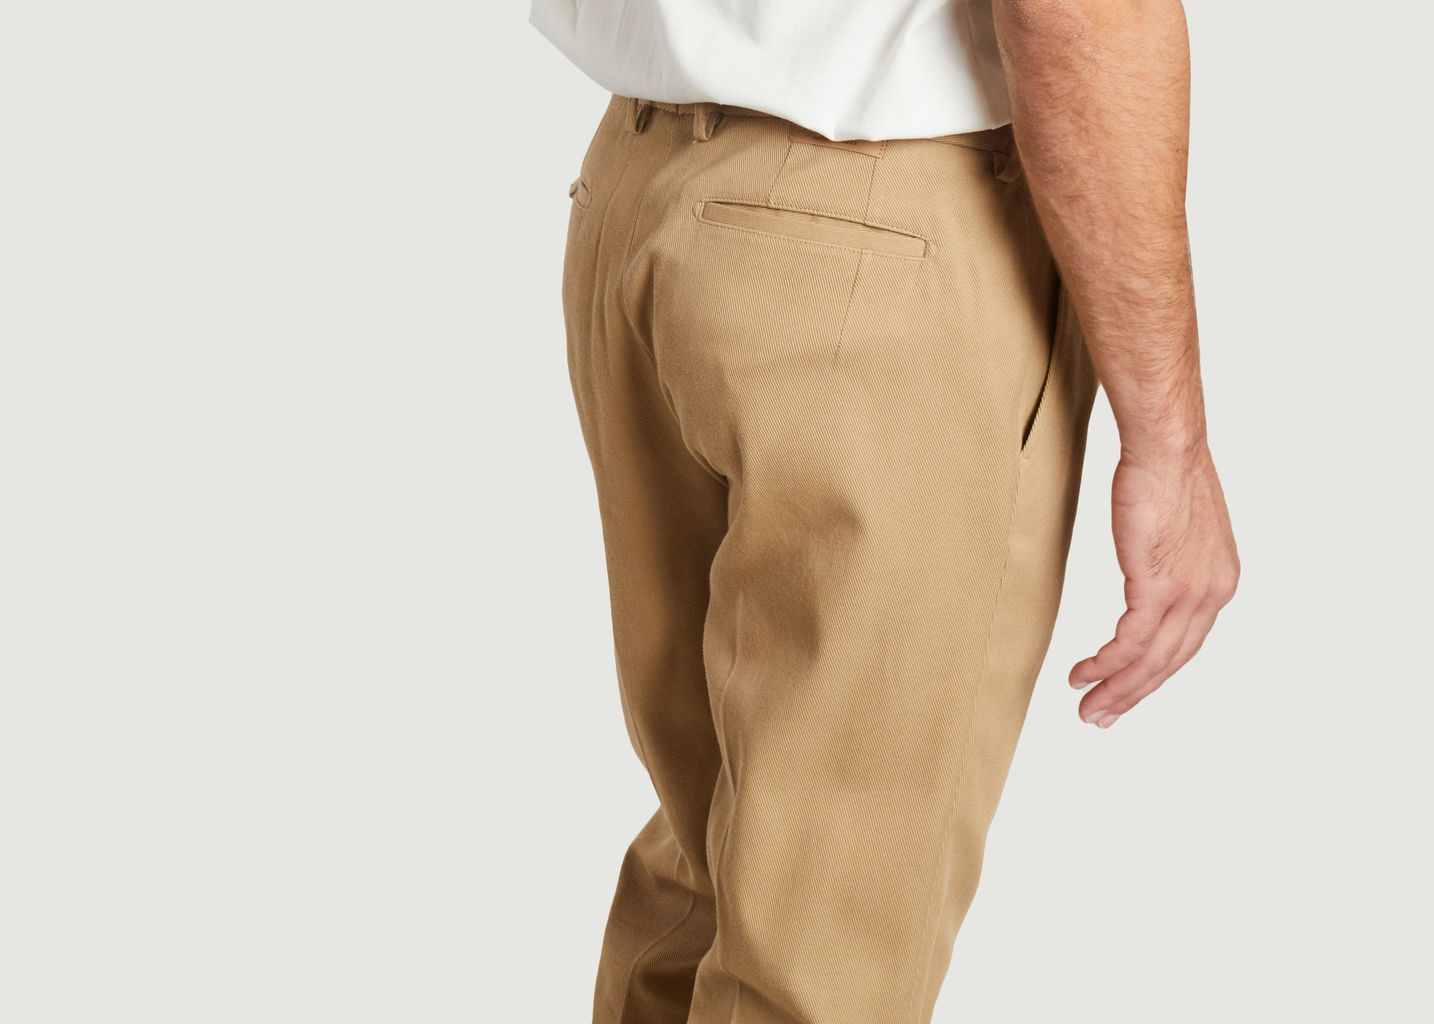 Chino pants in organic Lyocell  - The Chino Revived